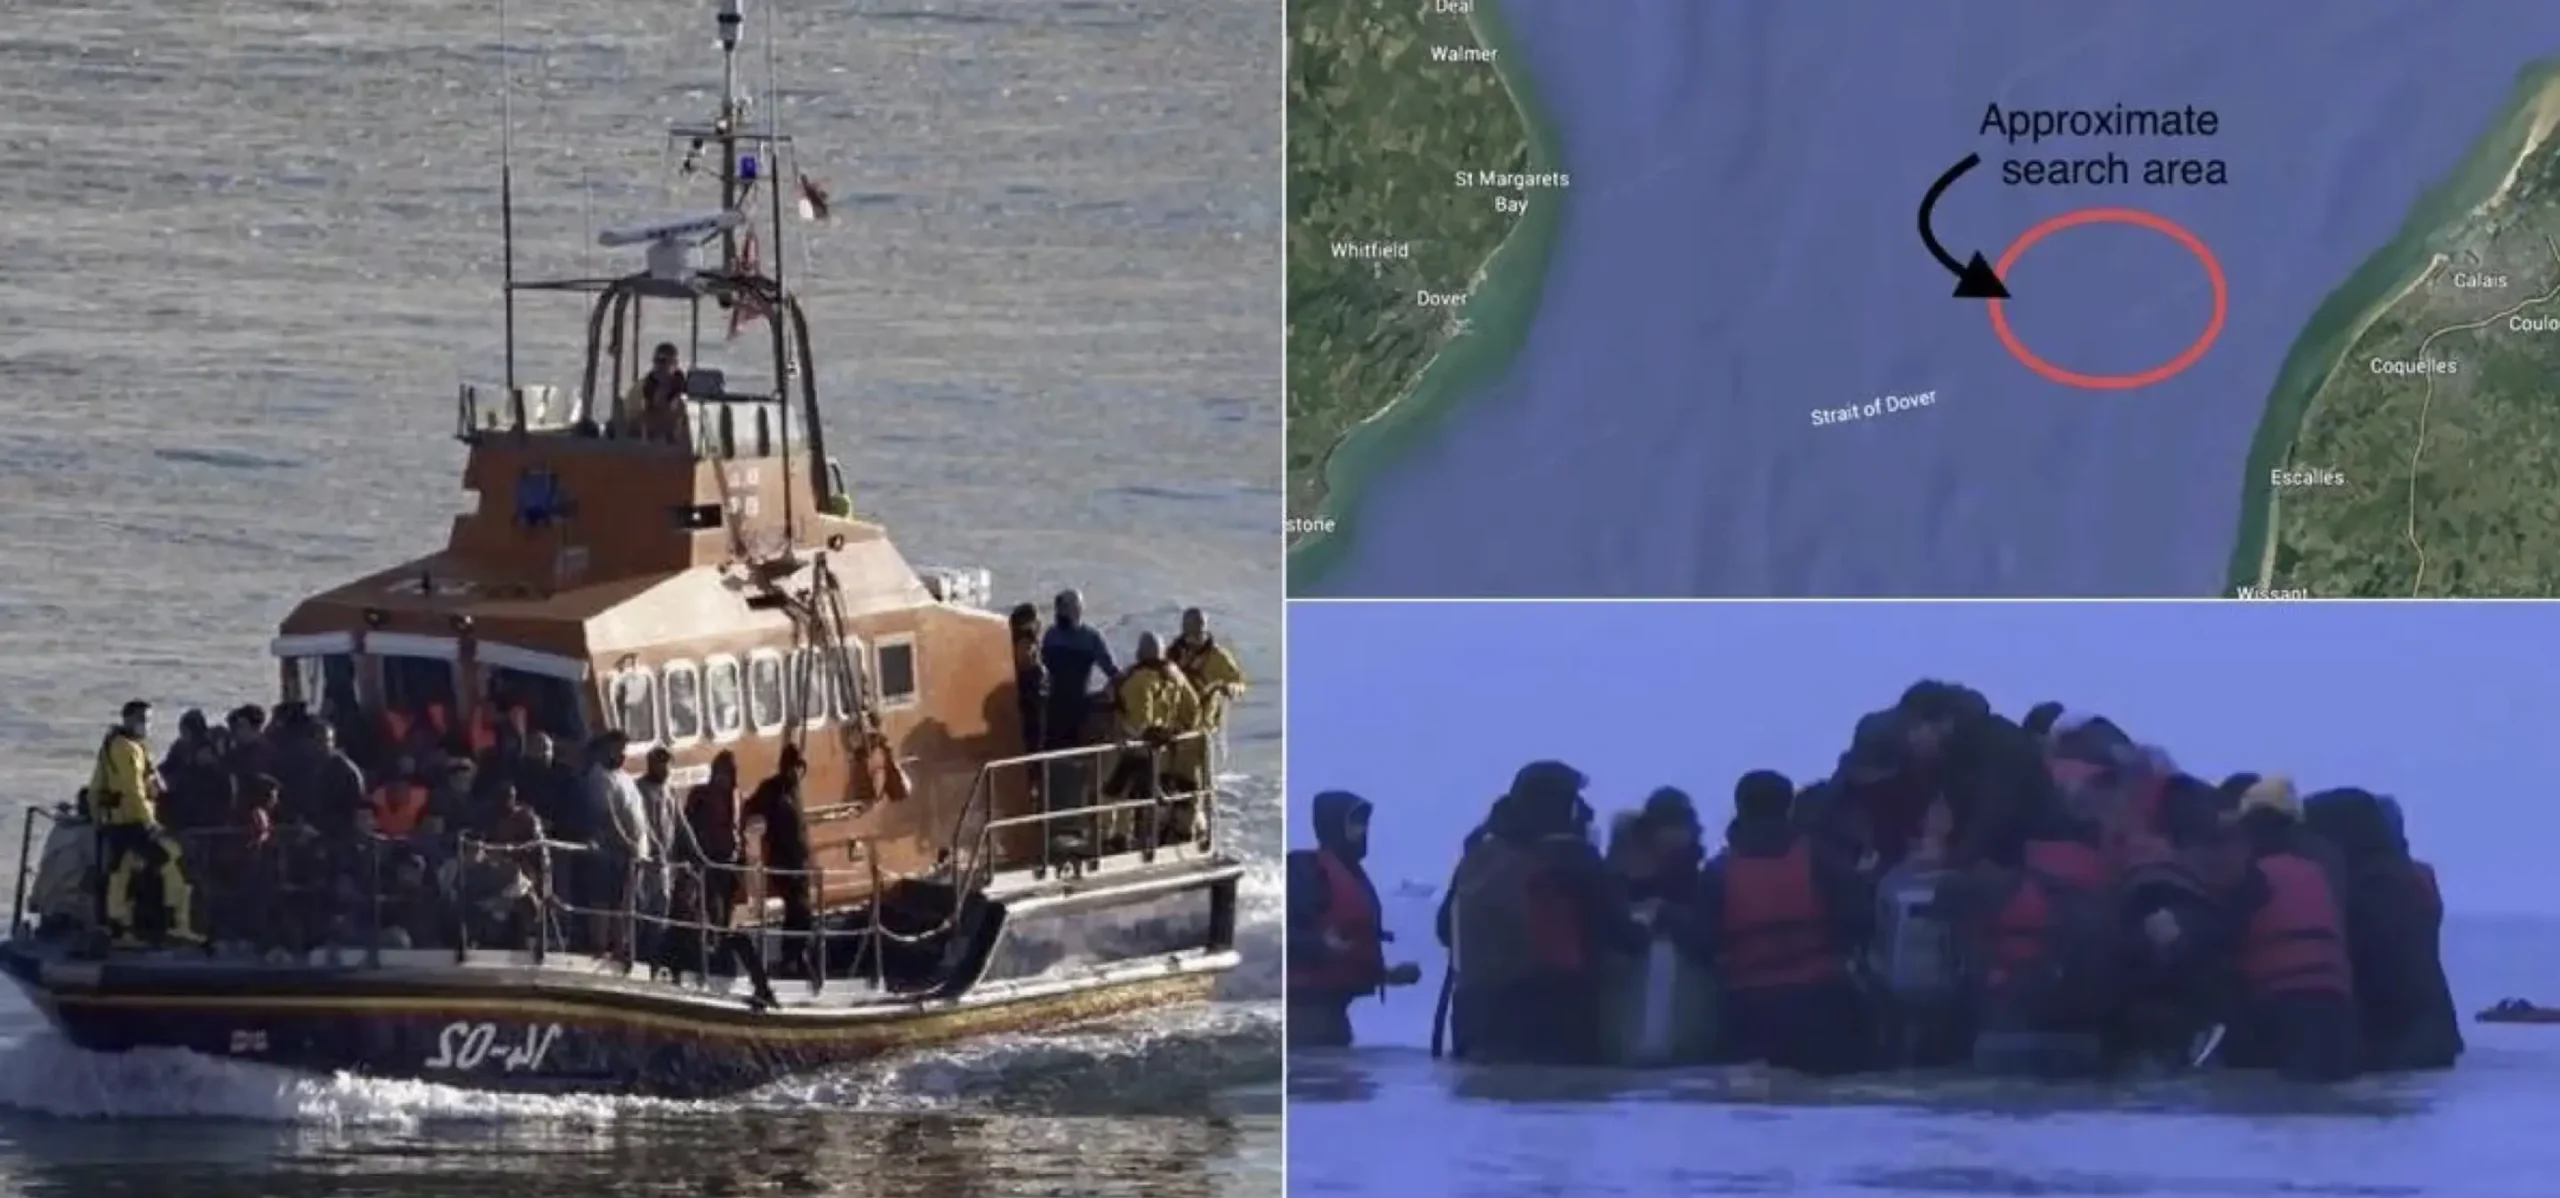 Six Die as Migrant Boat Capsizes in English Channel